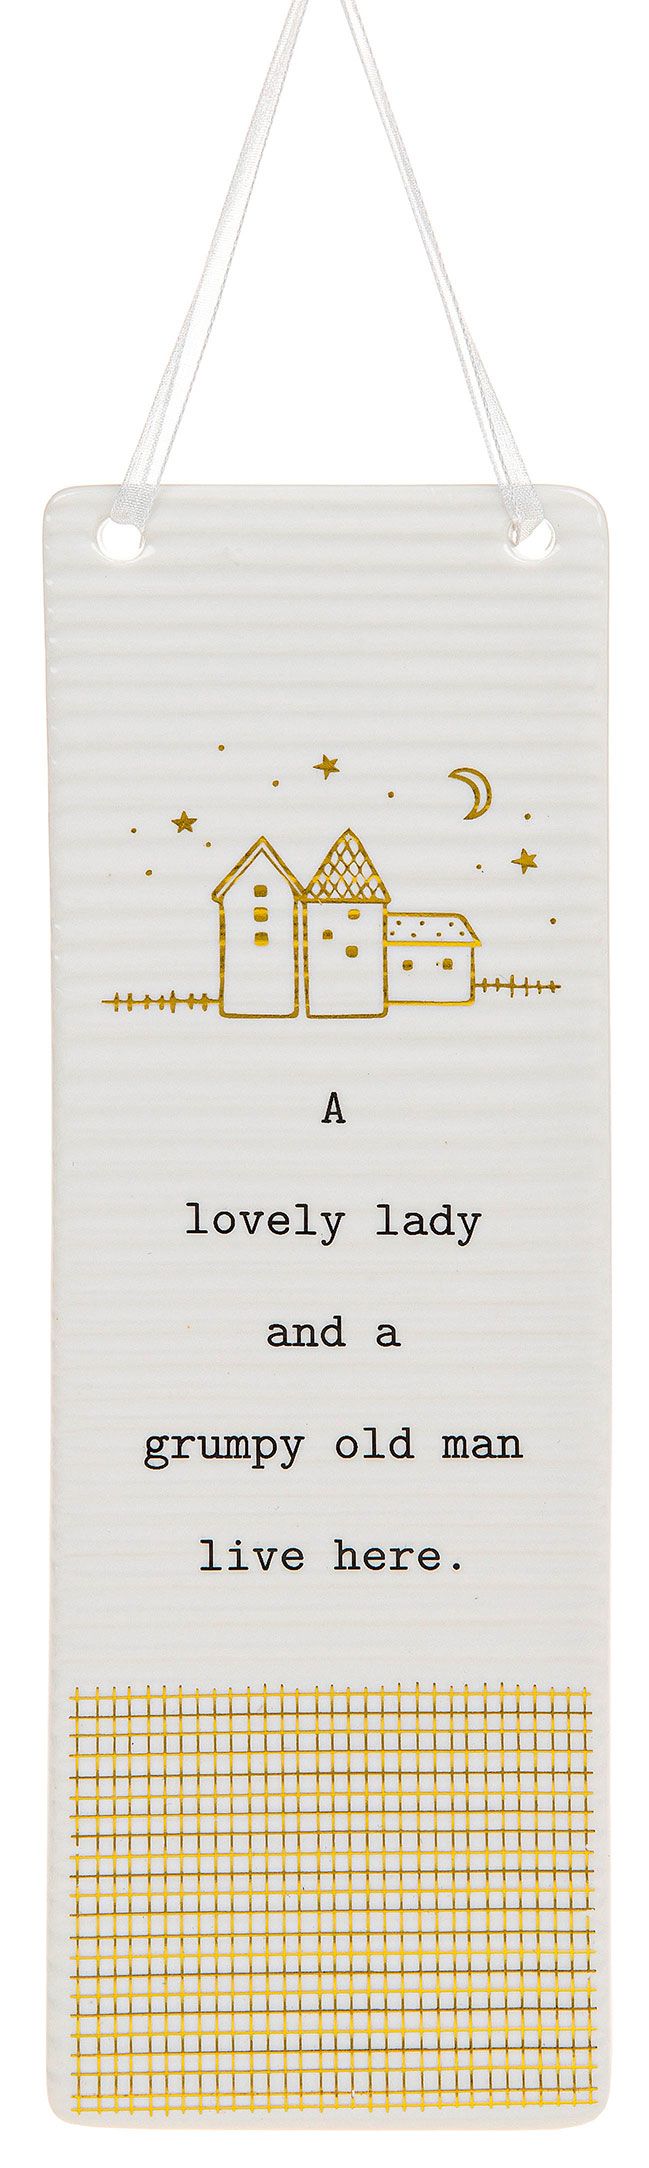 A Lovely Lady and a Grumpy Old Man Lives Here. Rectangle hanging plaque